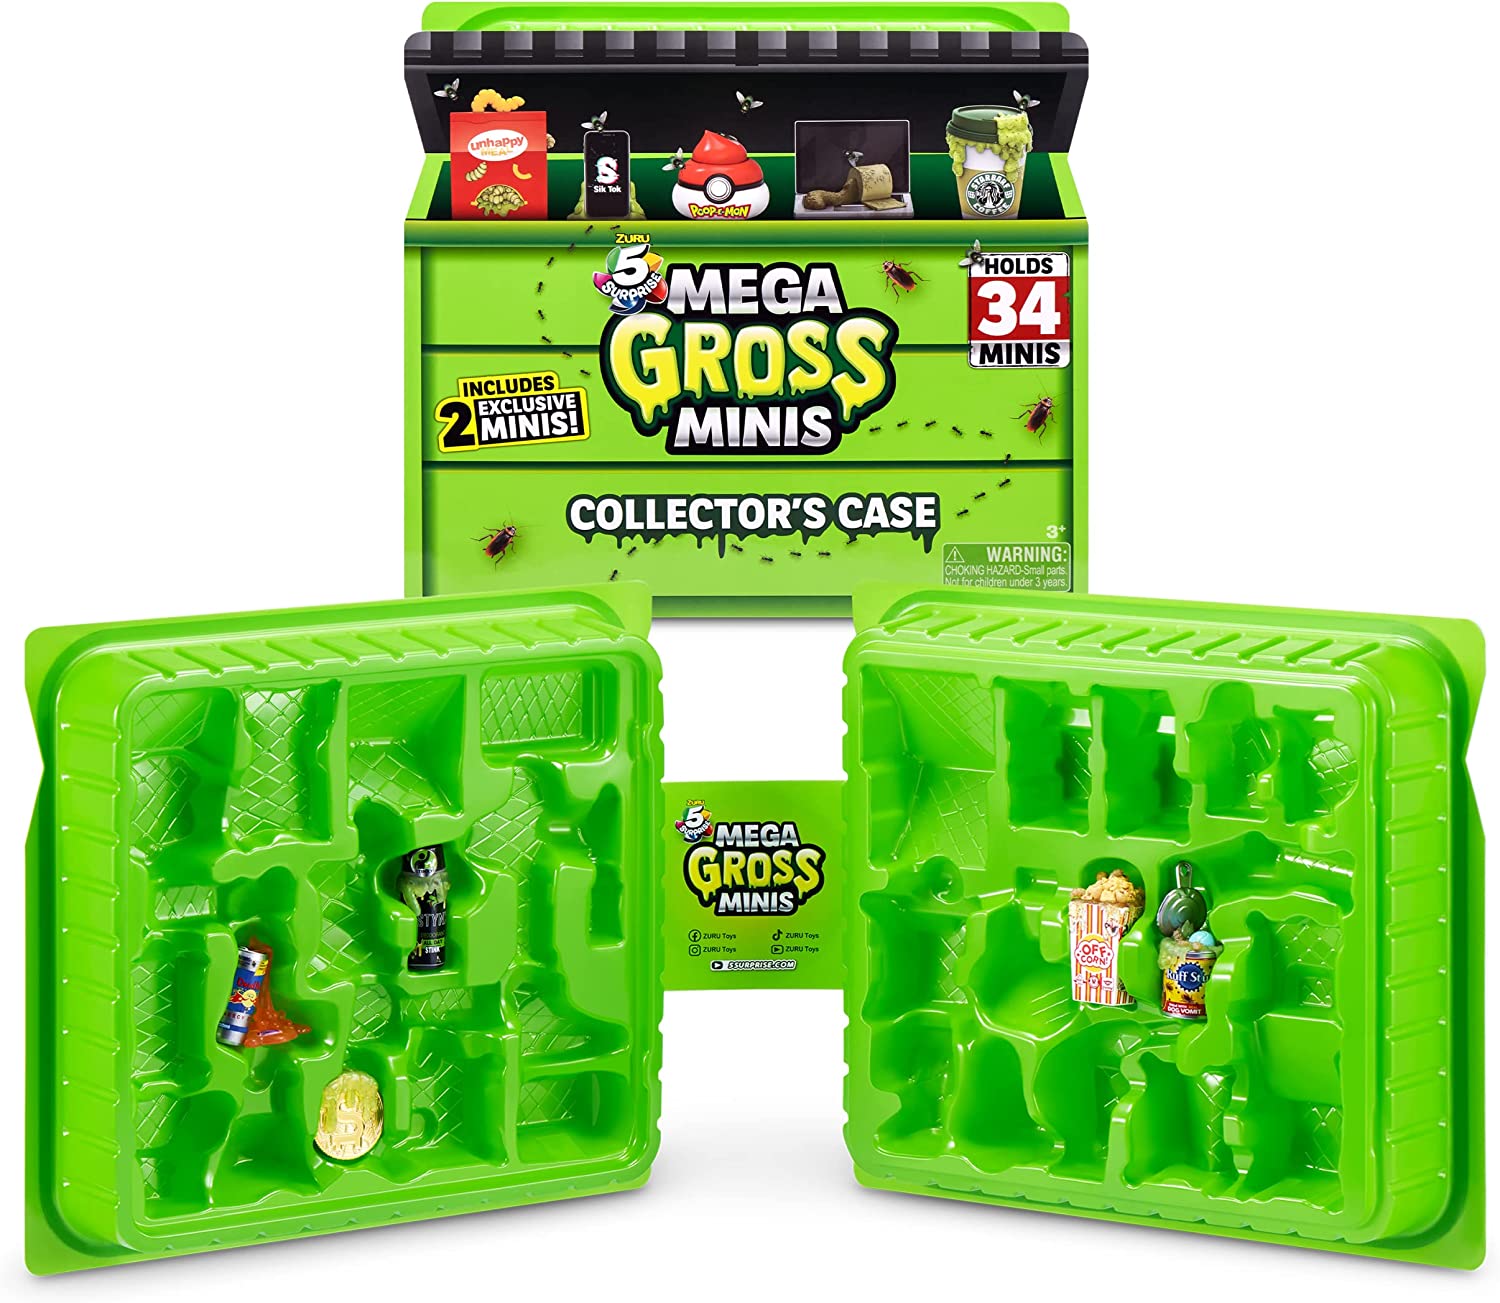 Zuru Mega Gross Minis PICK YOUR TOY Including Figures, Slime, and Stinky  Rare